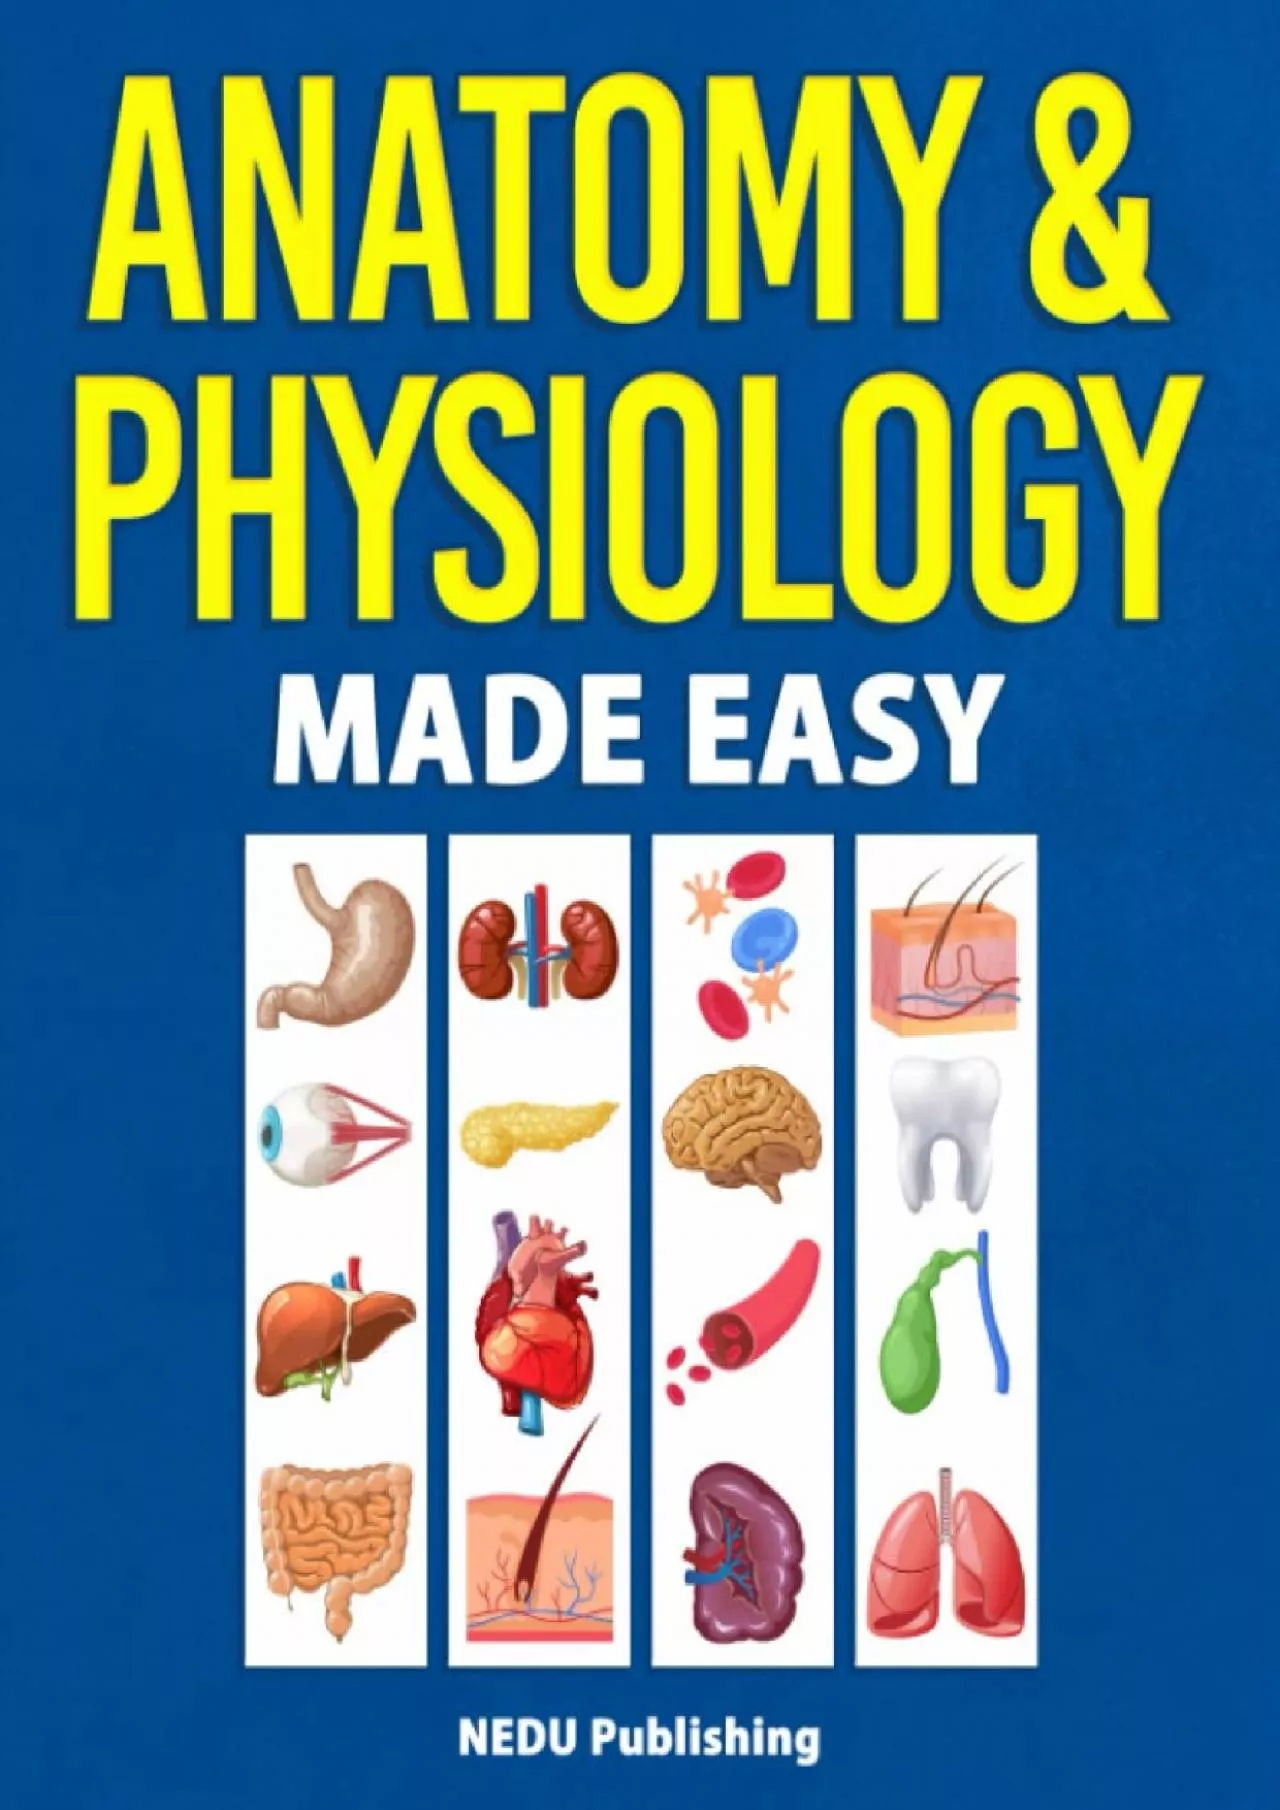 [EBOOK] Anatomy  Physiology Made Easy: An Illustrated Study Guide for Students To Easily